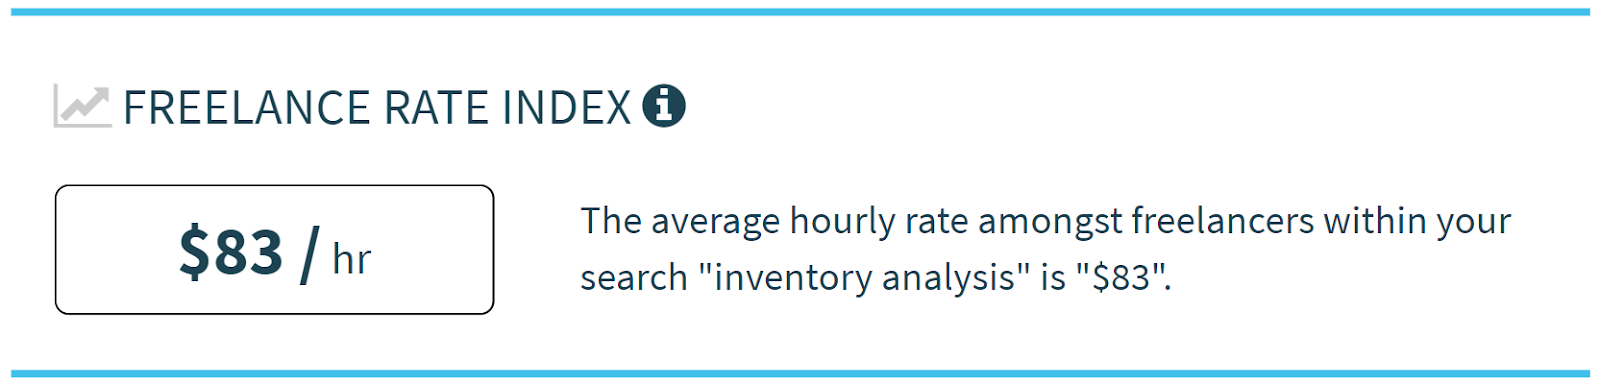 $83/hour - Average Hourly Rate Of Freelance Inventory Analysts